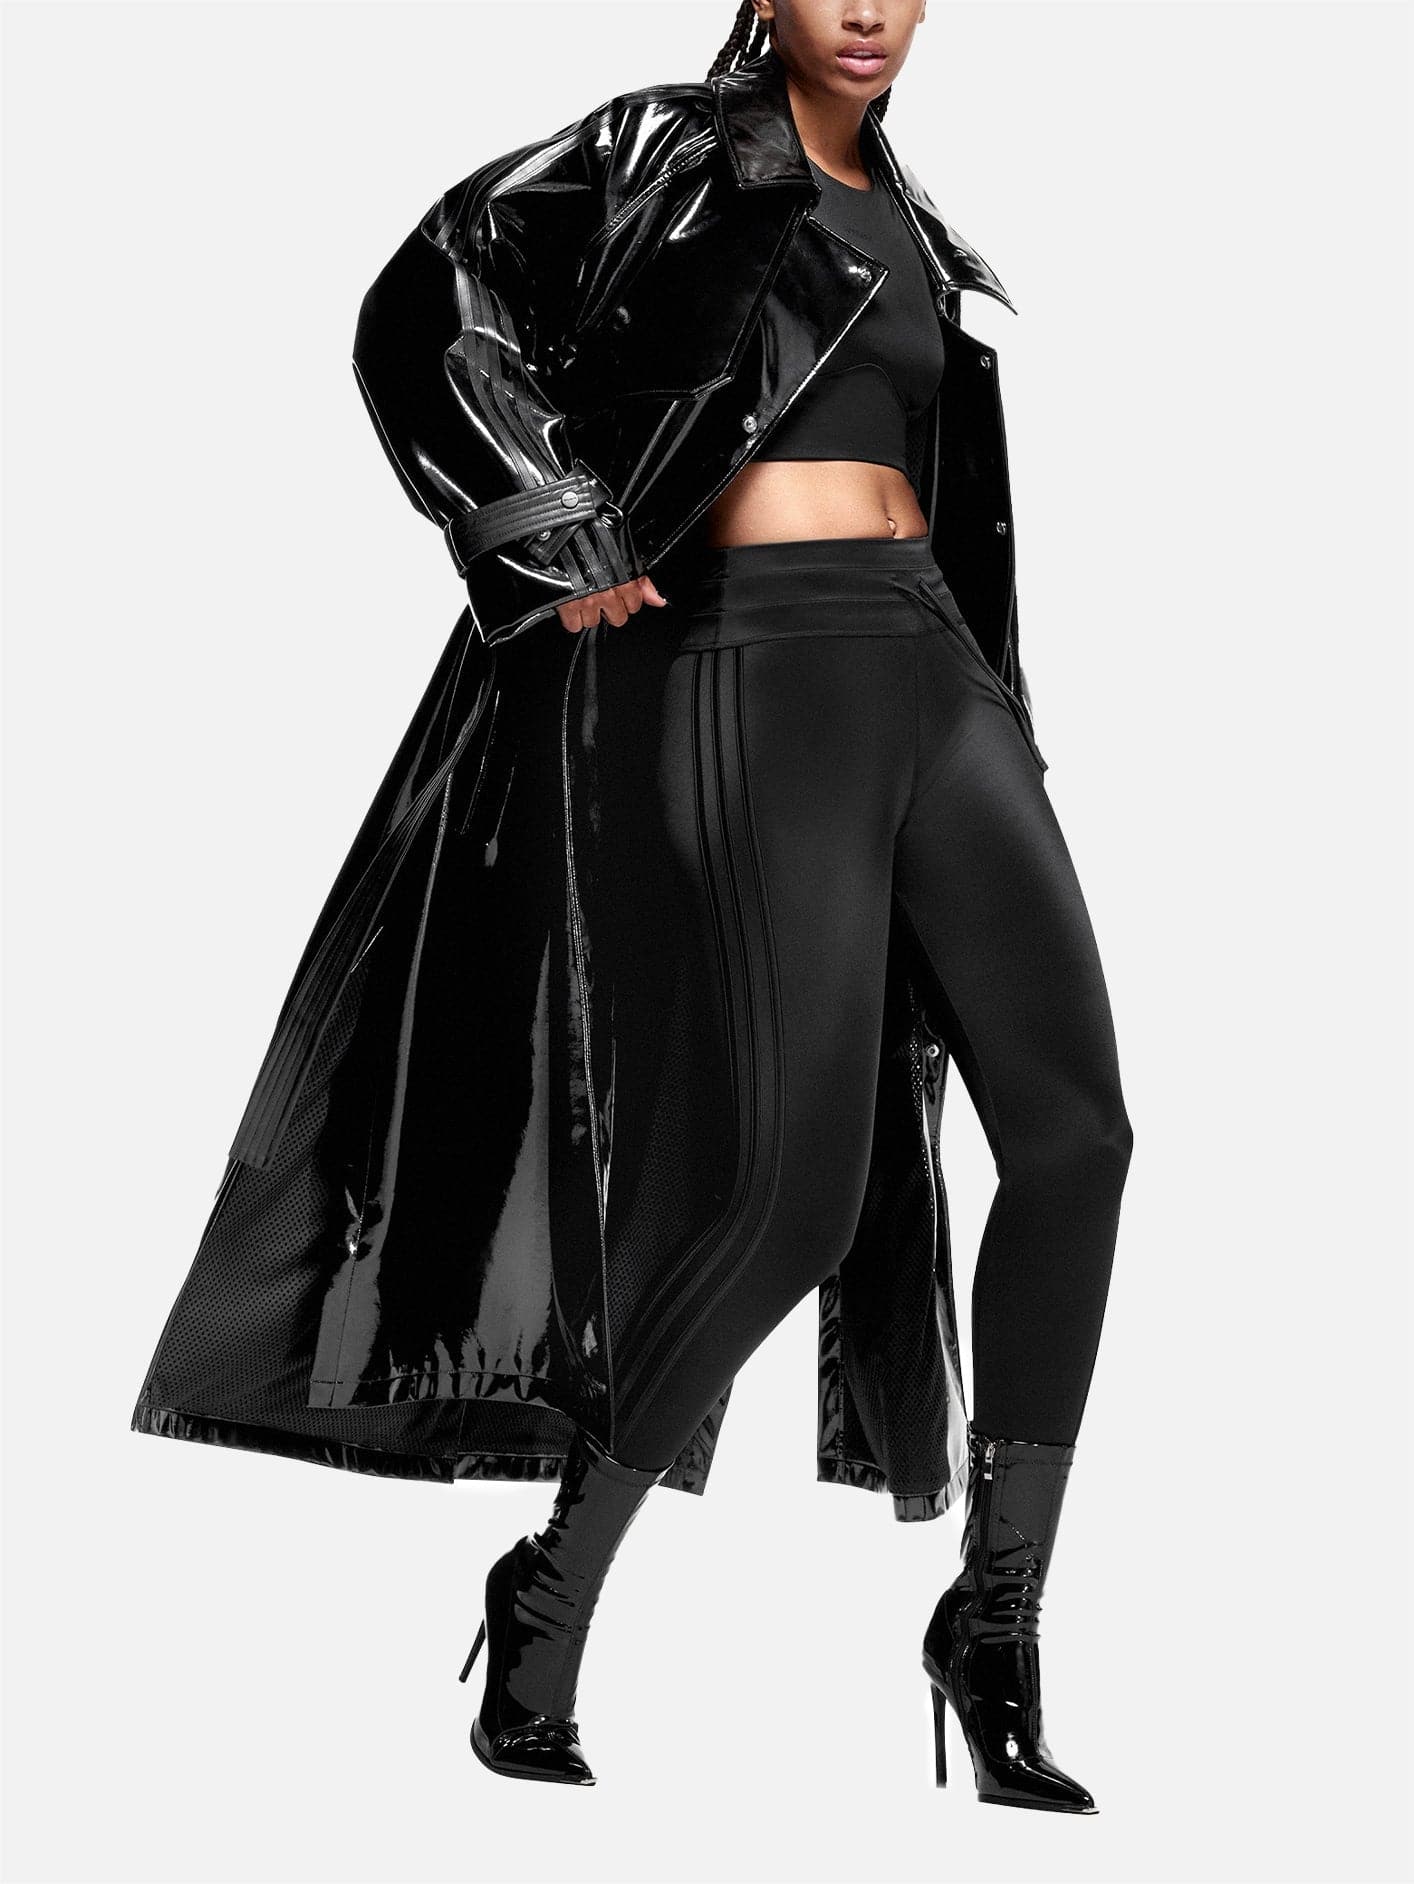 adidas IVY PARK Latex Trench Coat (All Gender) - Black